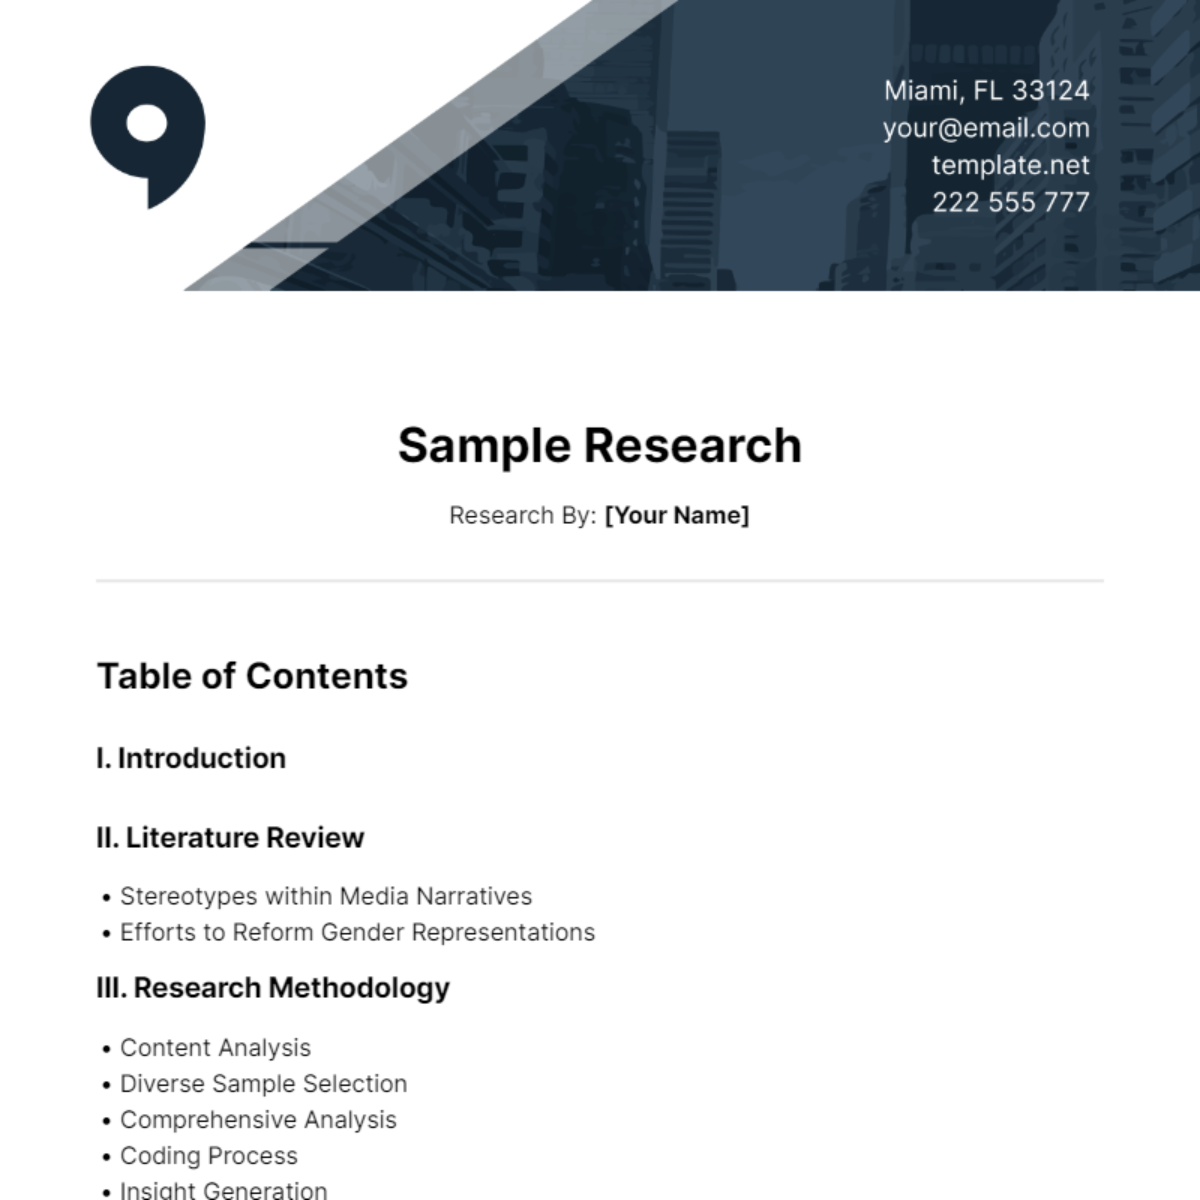 Sample Research Template